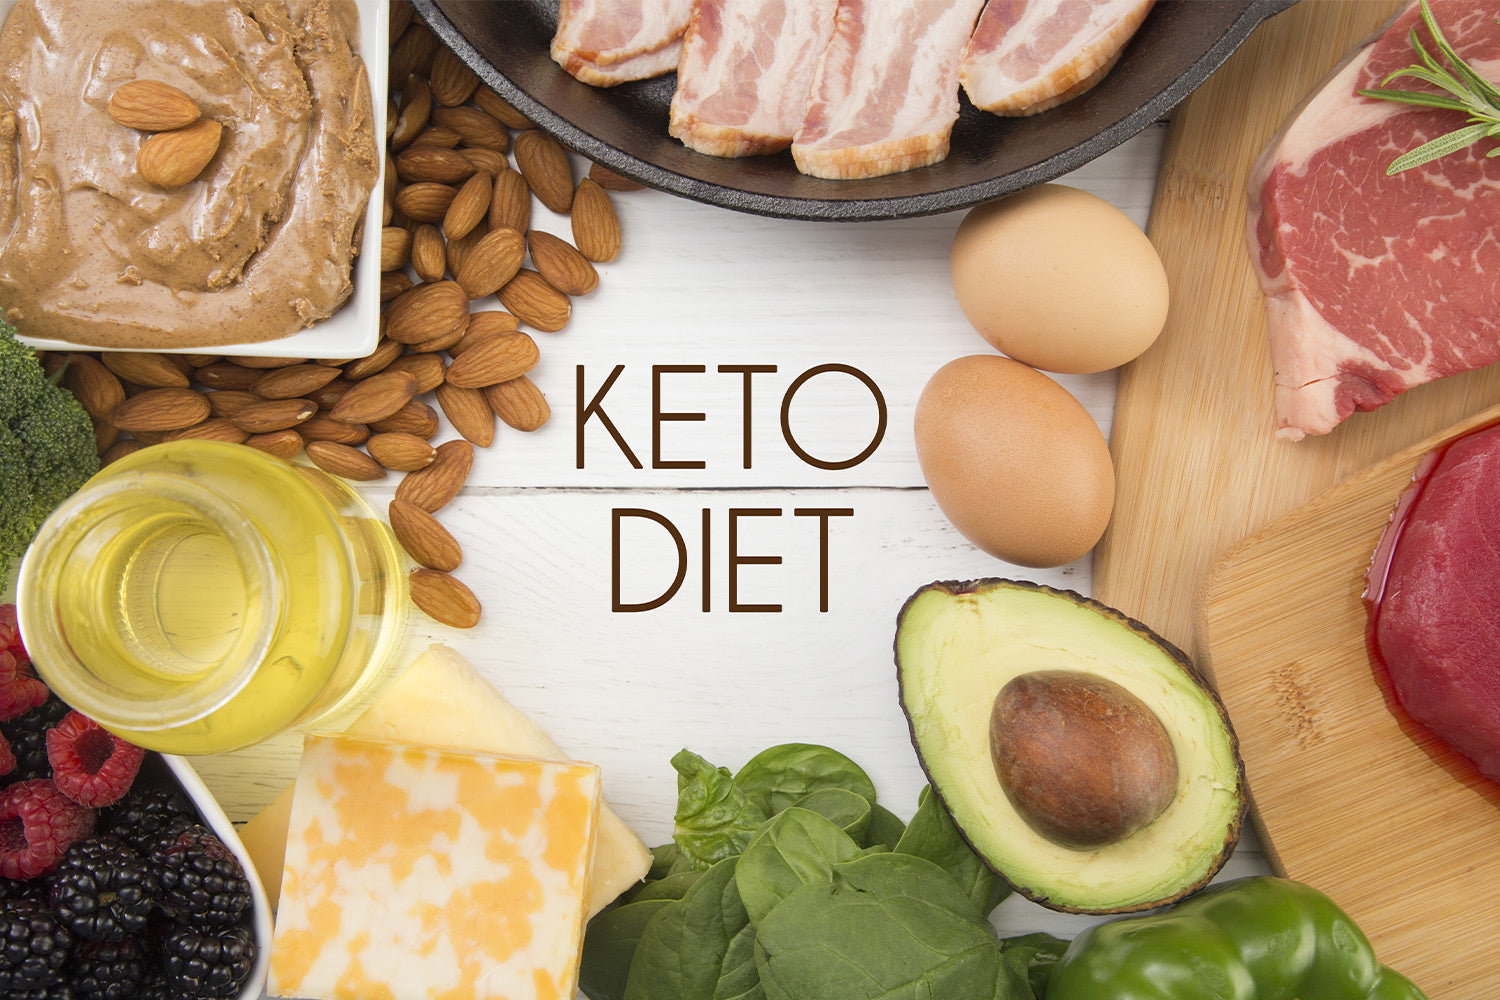 The words Keto diet surrounded by keto foods.